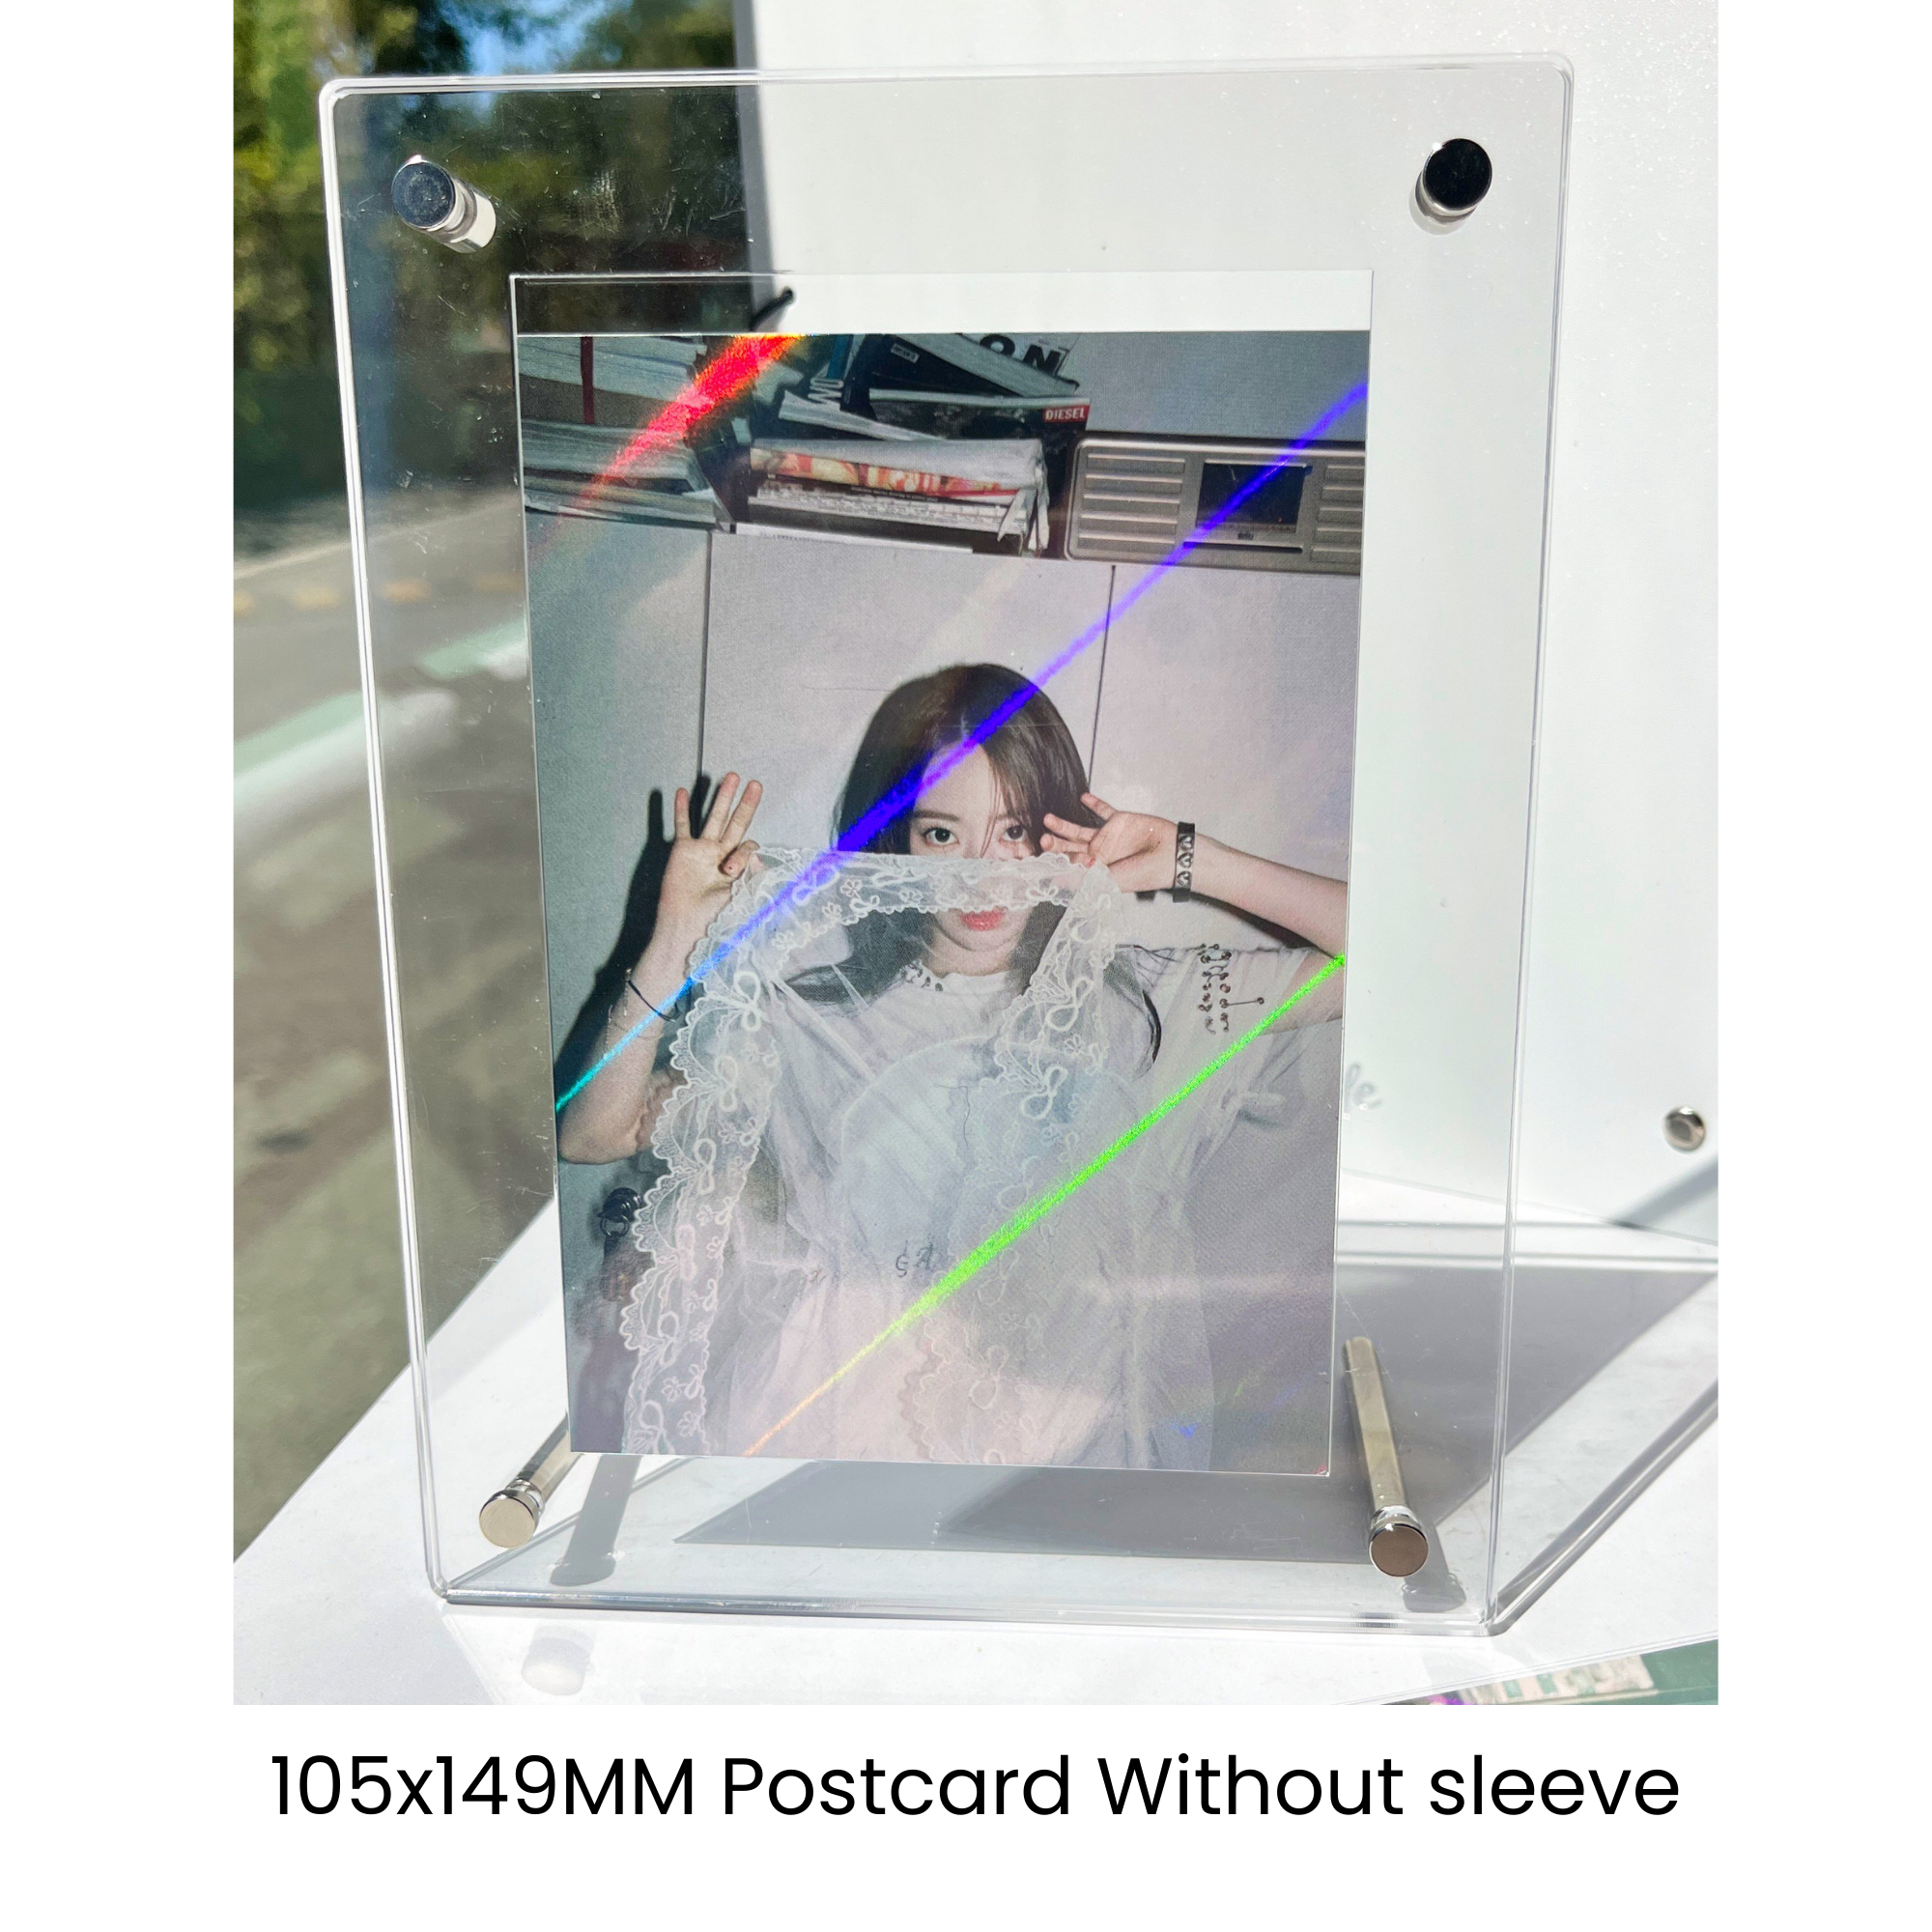 K-KEEP Acrylic Display Frame - [1 Postcard Frame] Slot Size 105x155MM Fit Postcard with 103x153MM or 104x105MM Sleeve